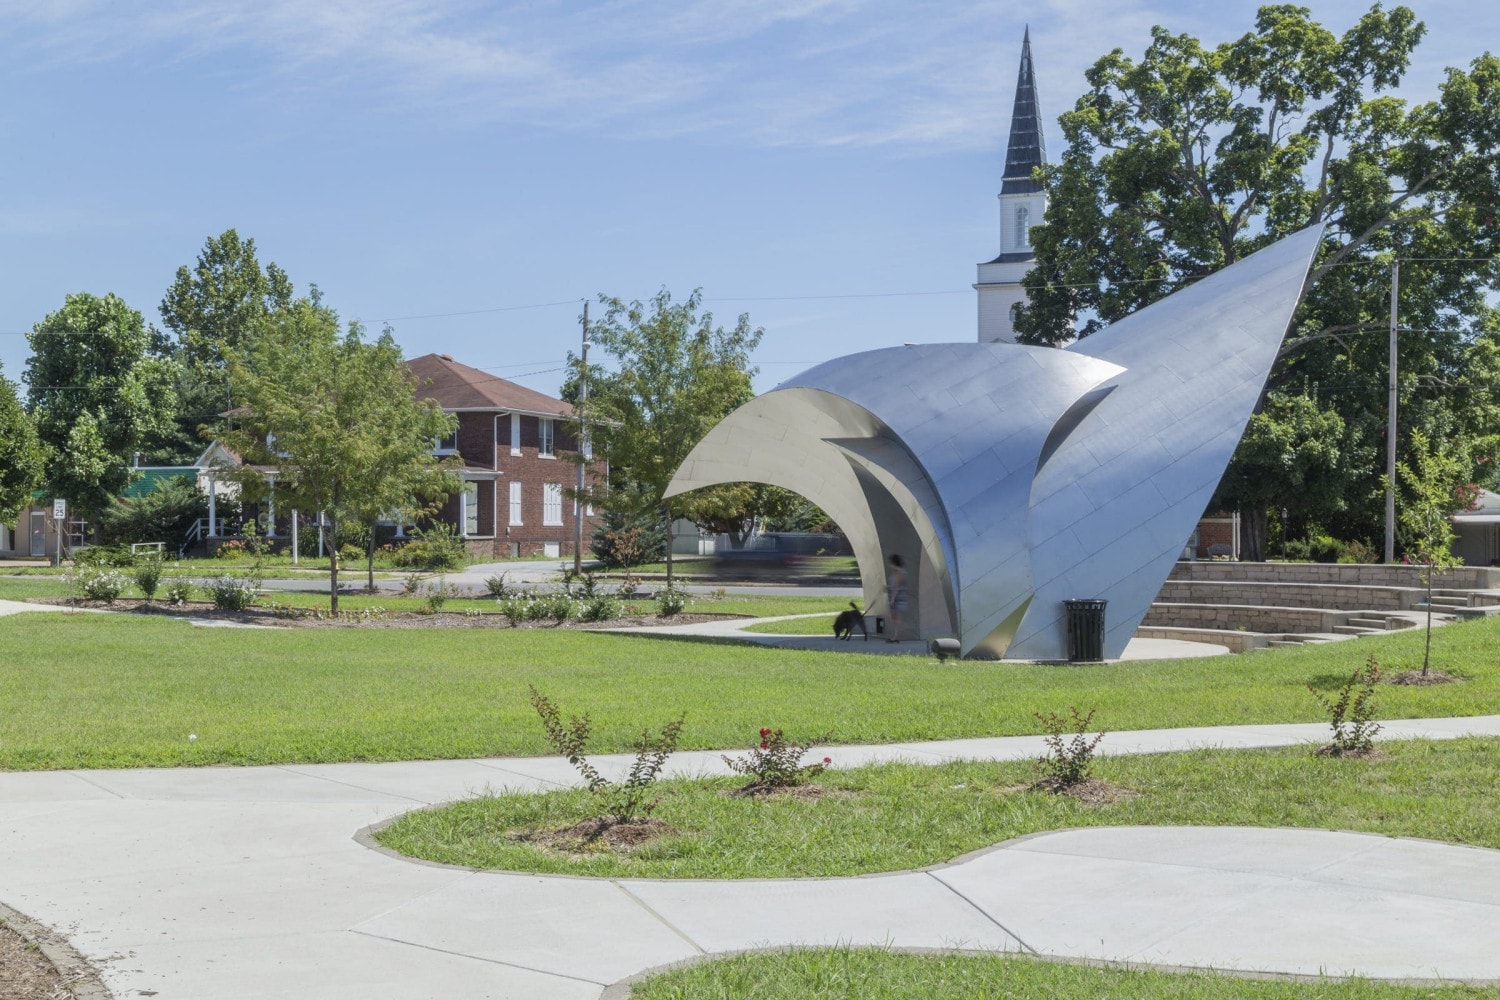 Murphysboro Town Park Pavilion and Bandshell by John Medwedeff